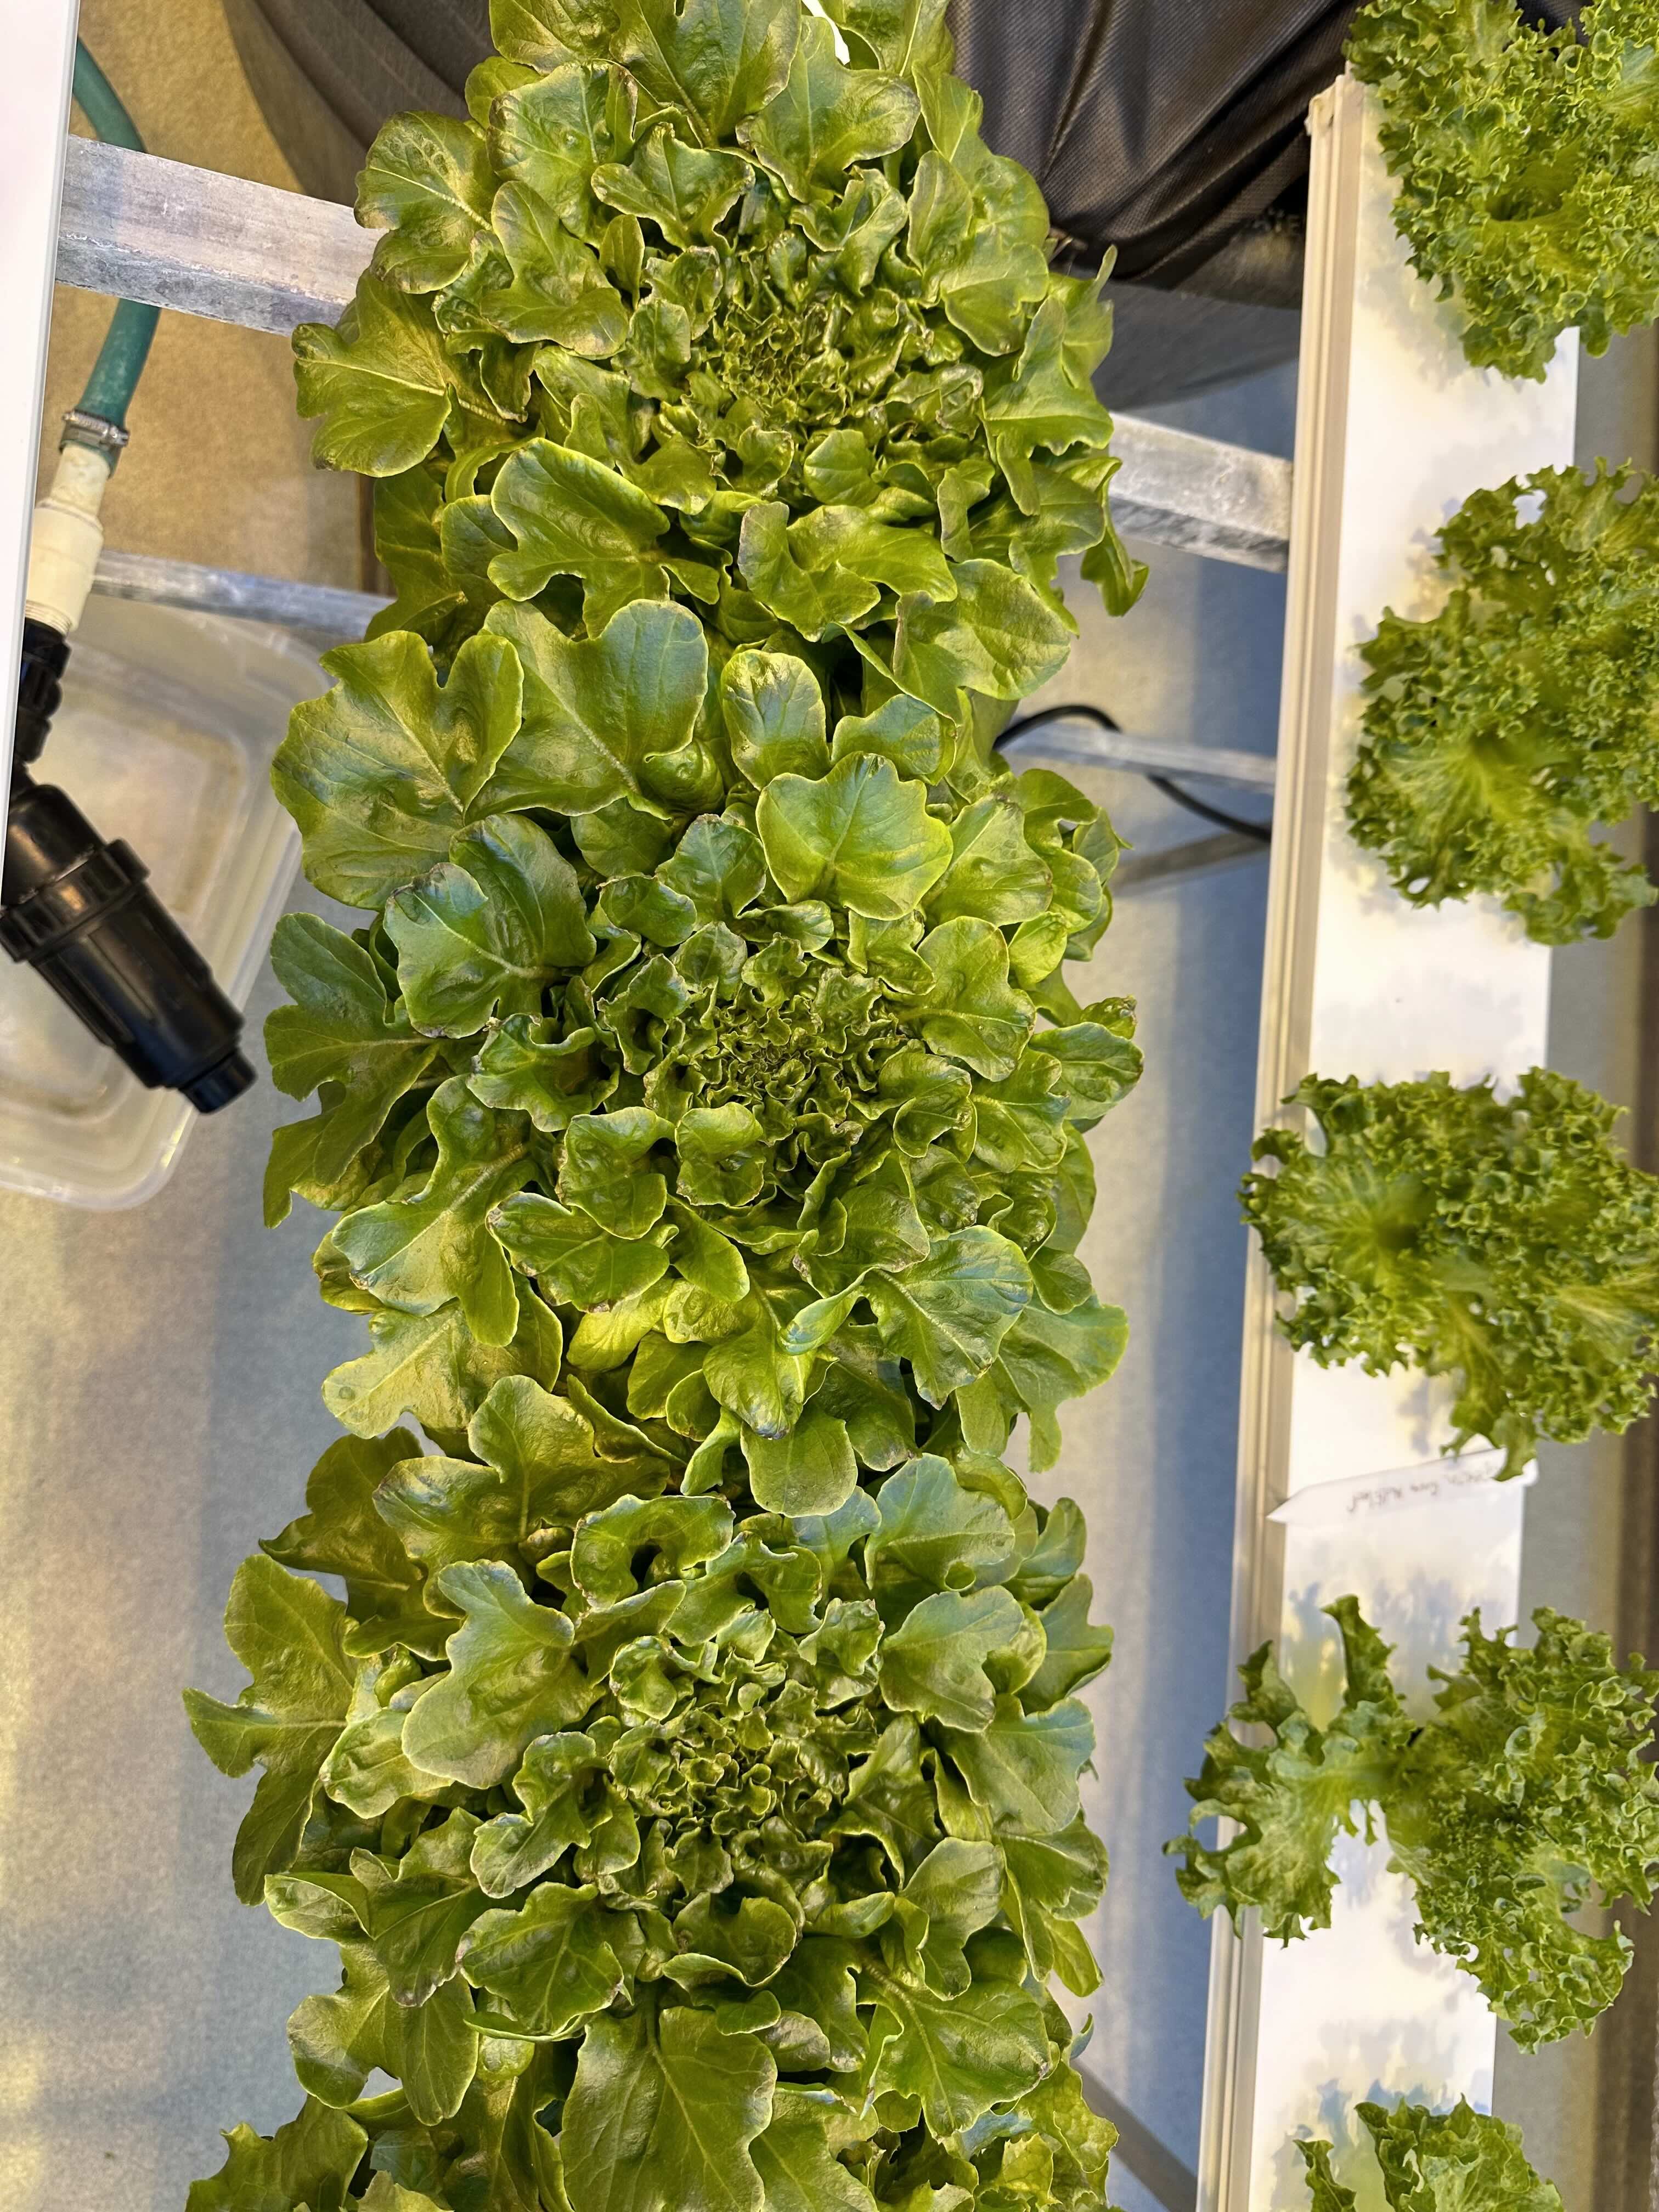 Lettuce growing hydroponically